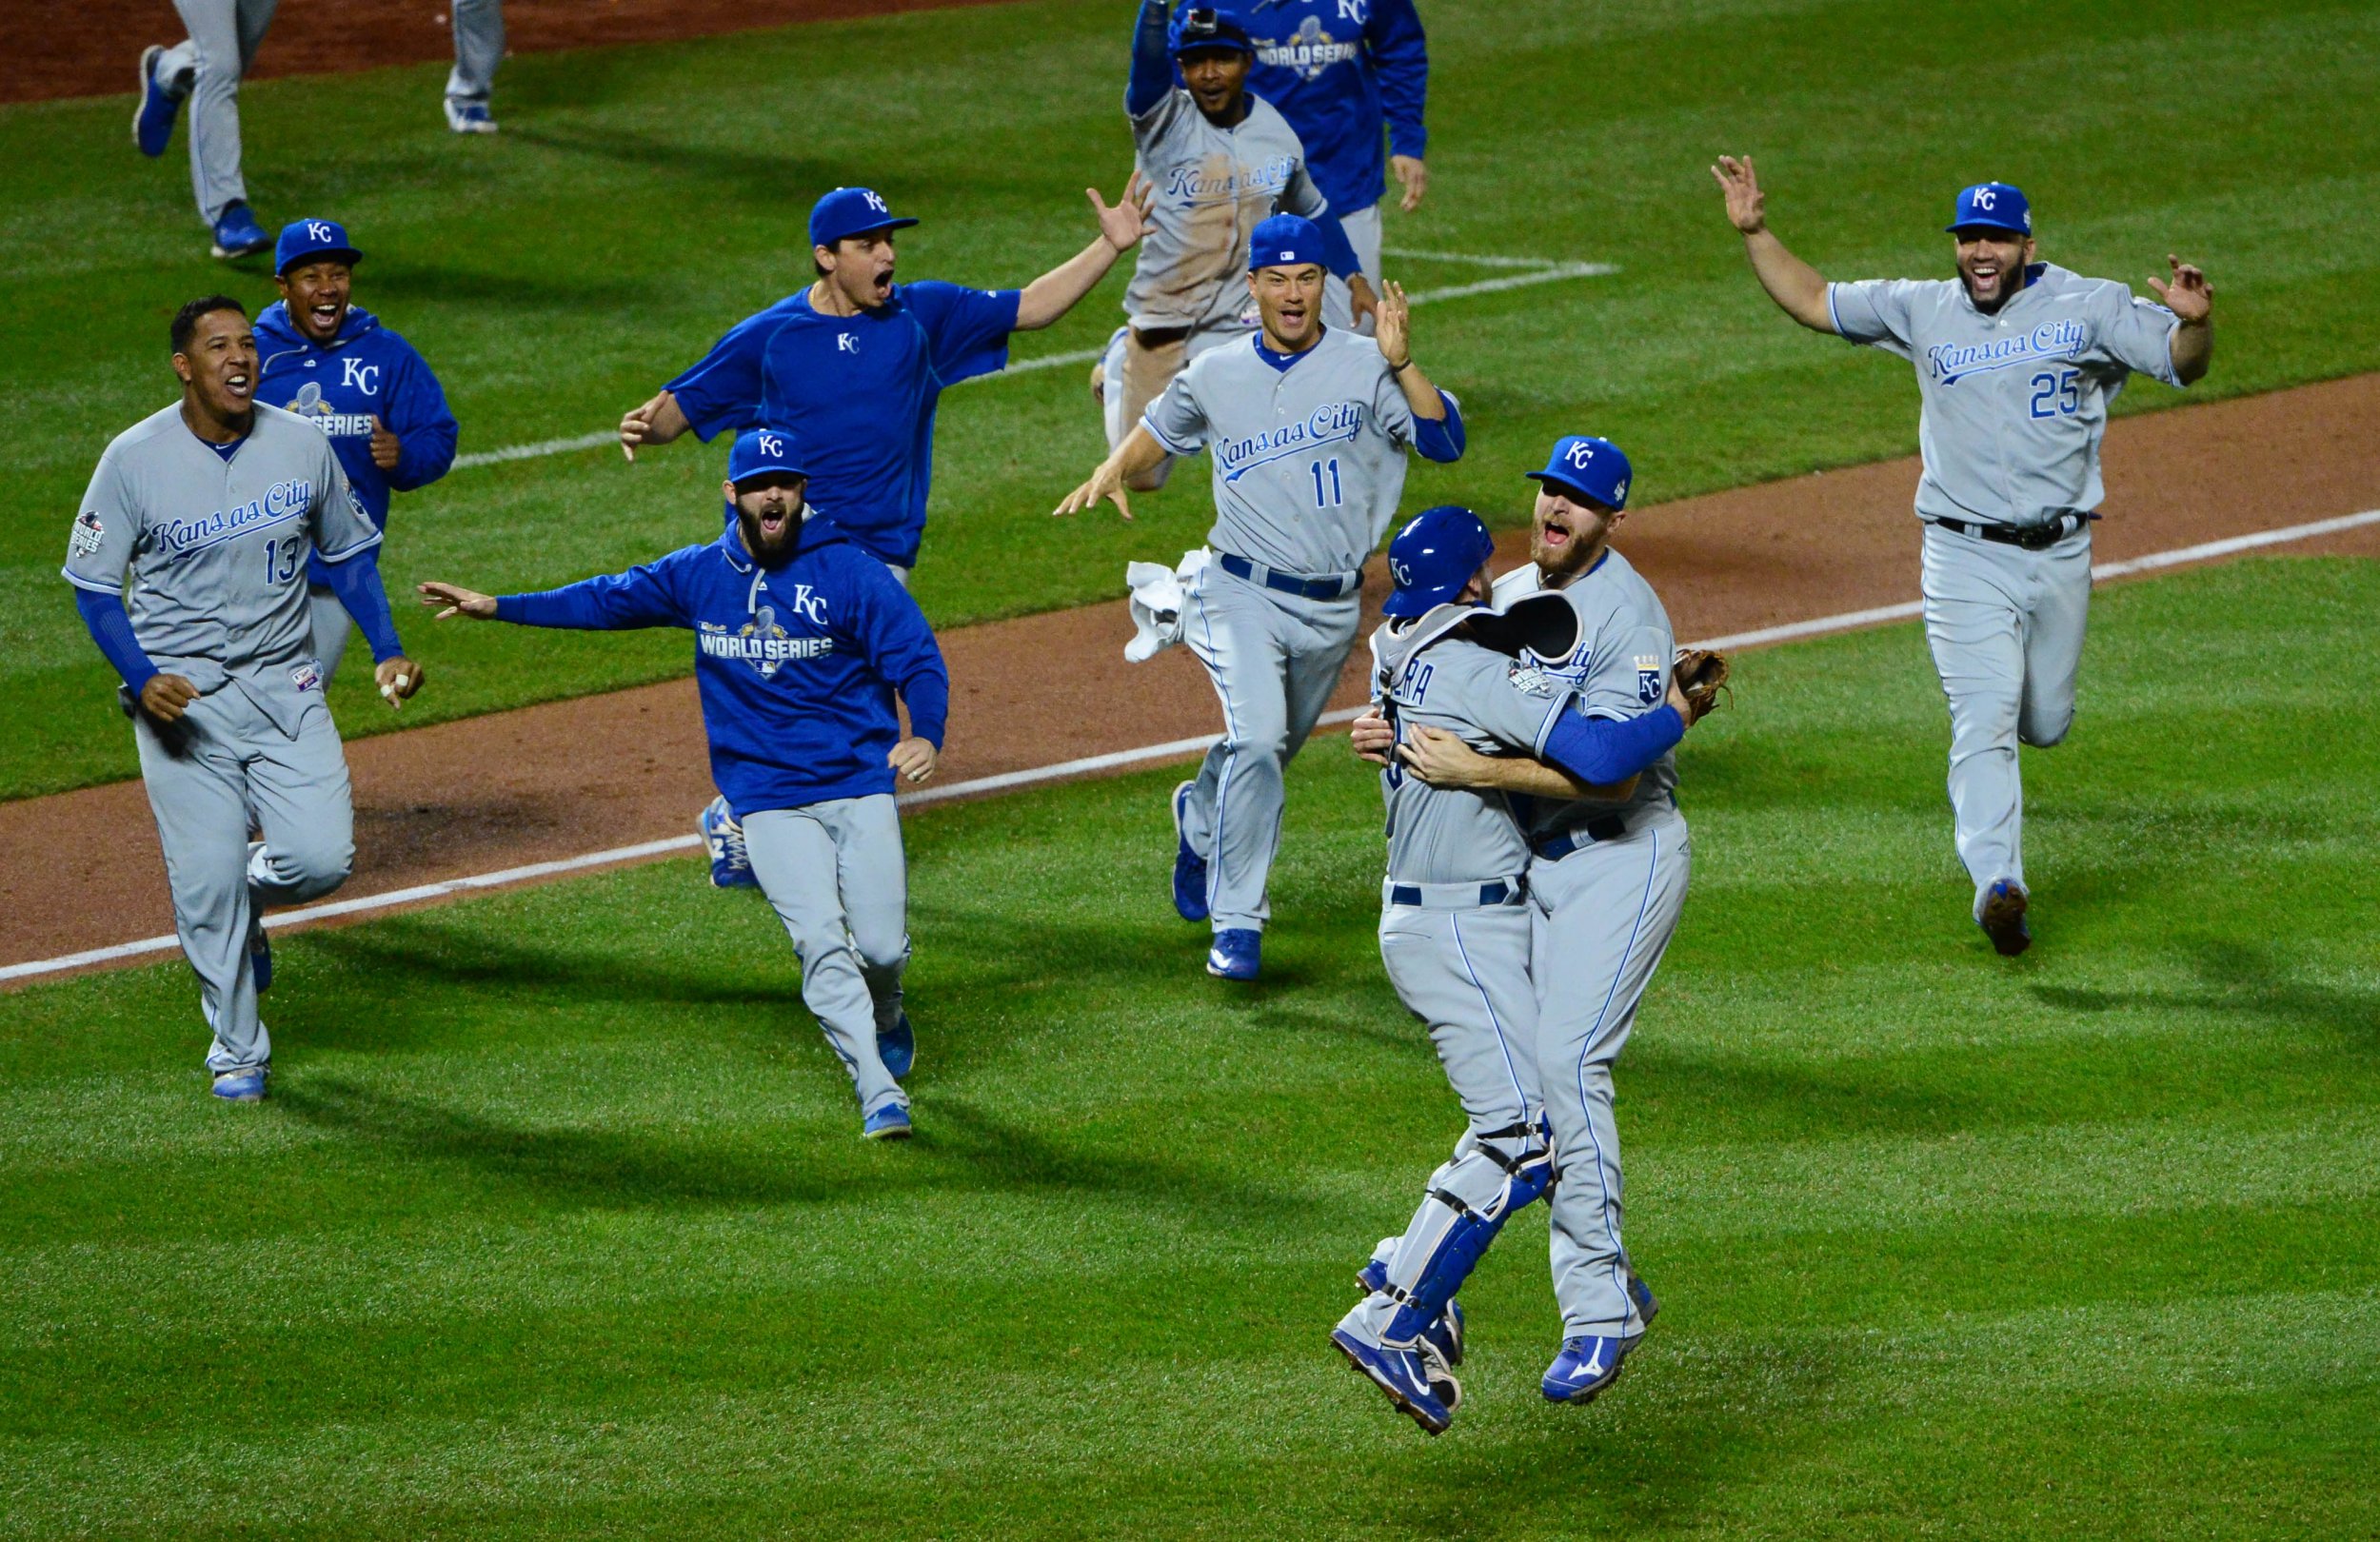 30 YEARS IN THE MAKING: The Playoffs Story of the 2015 Royals 